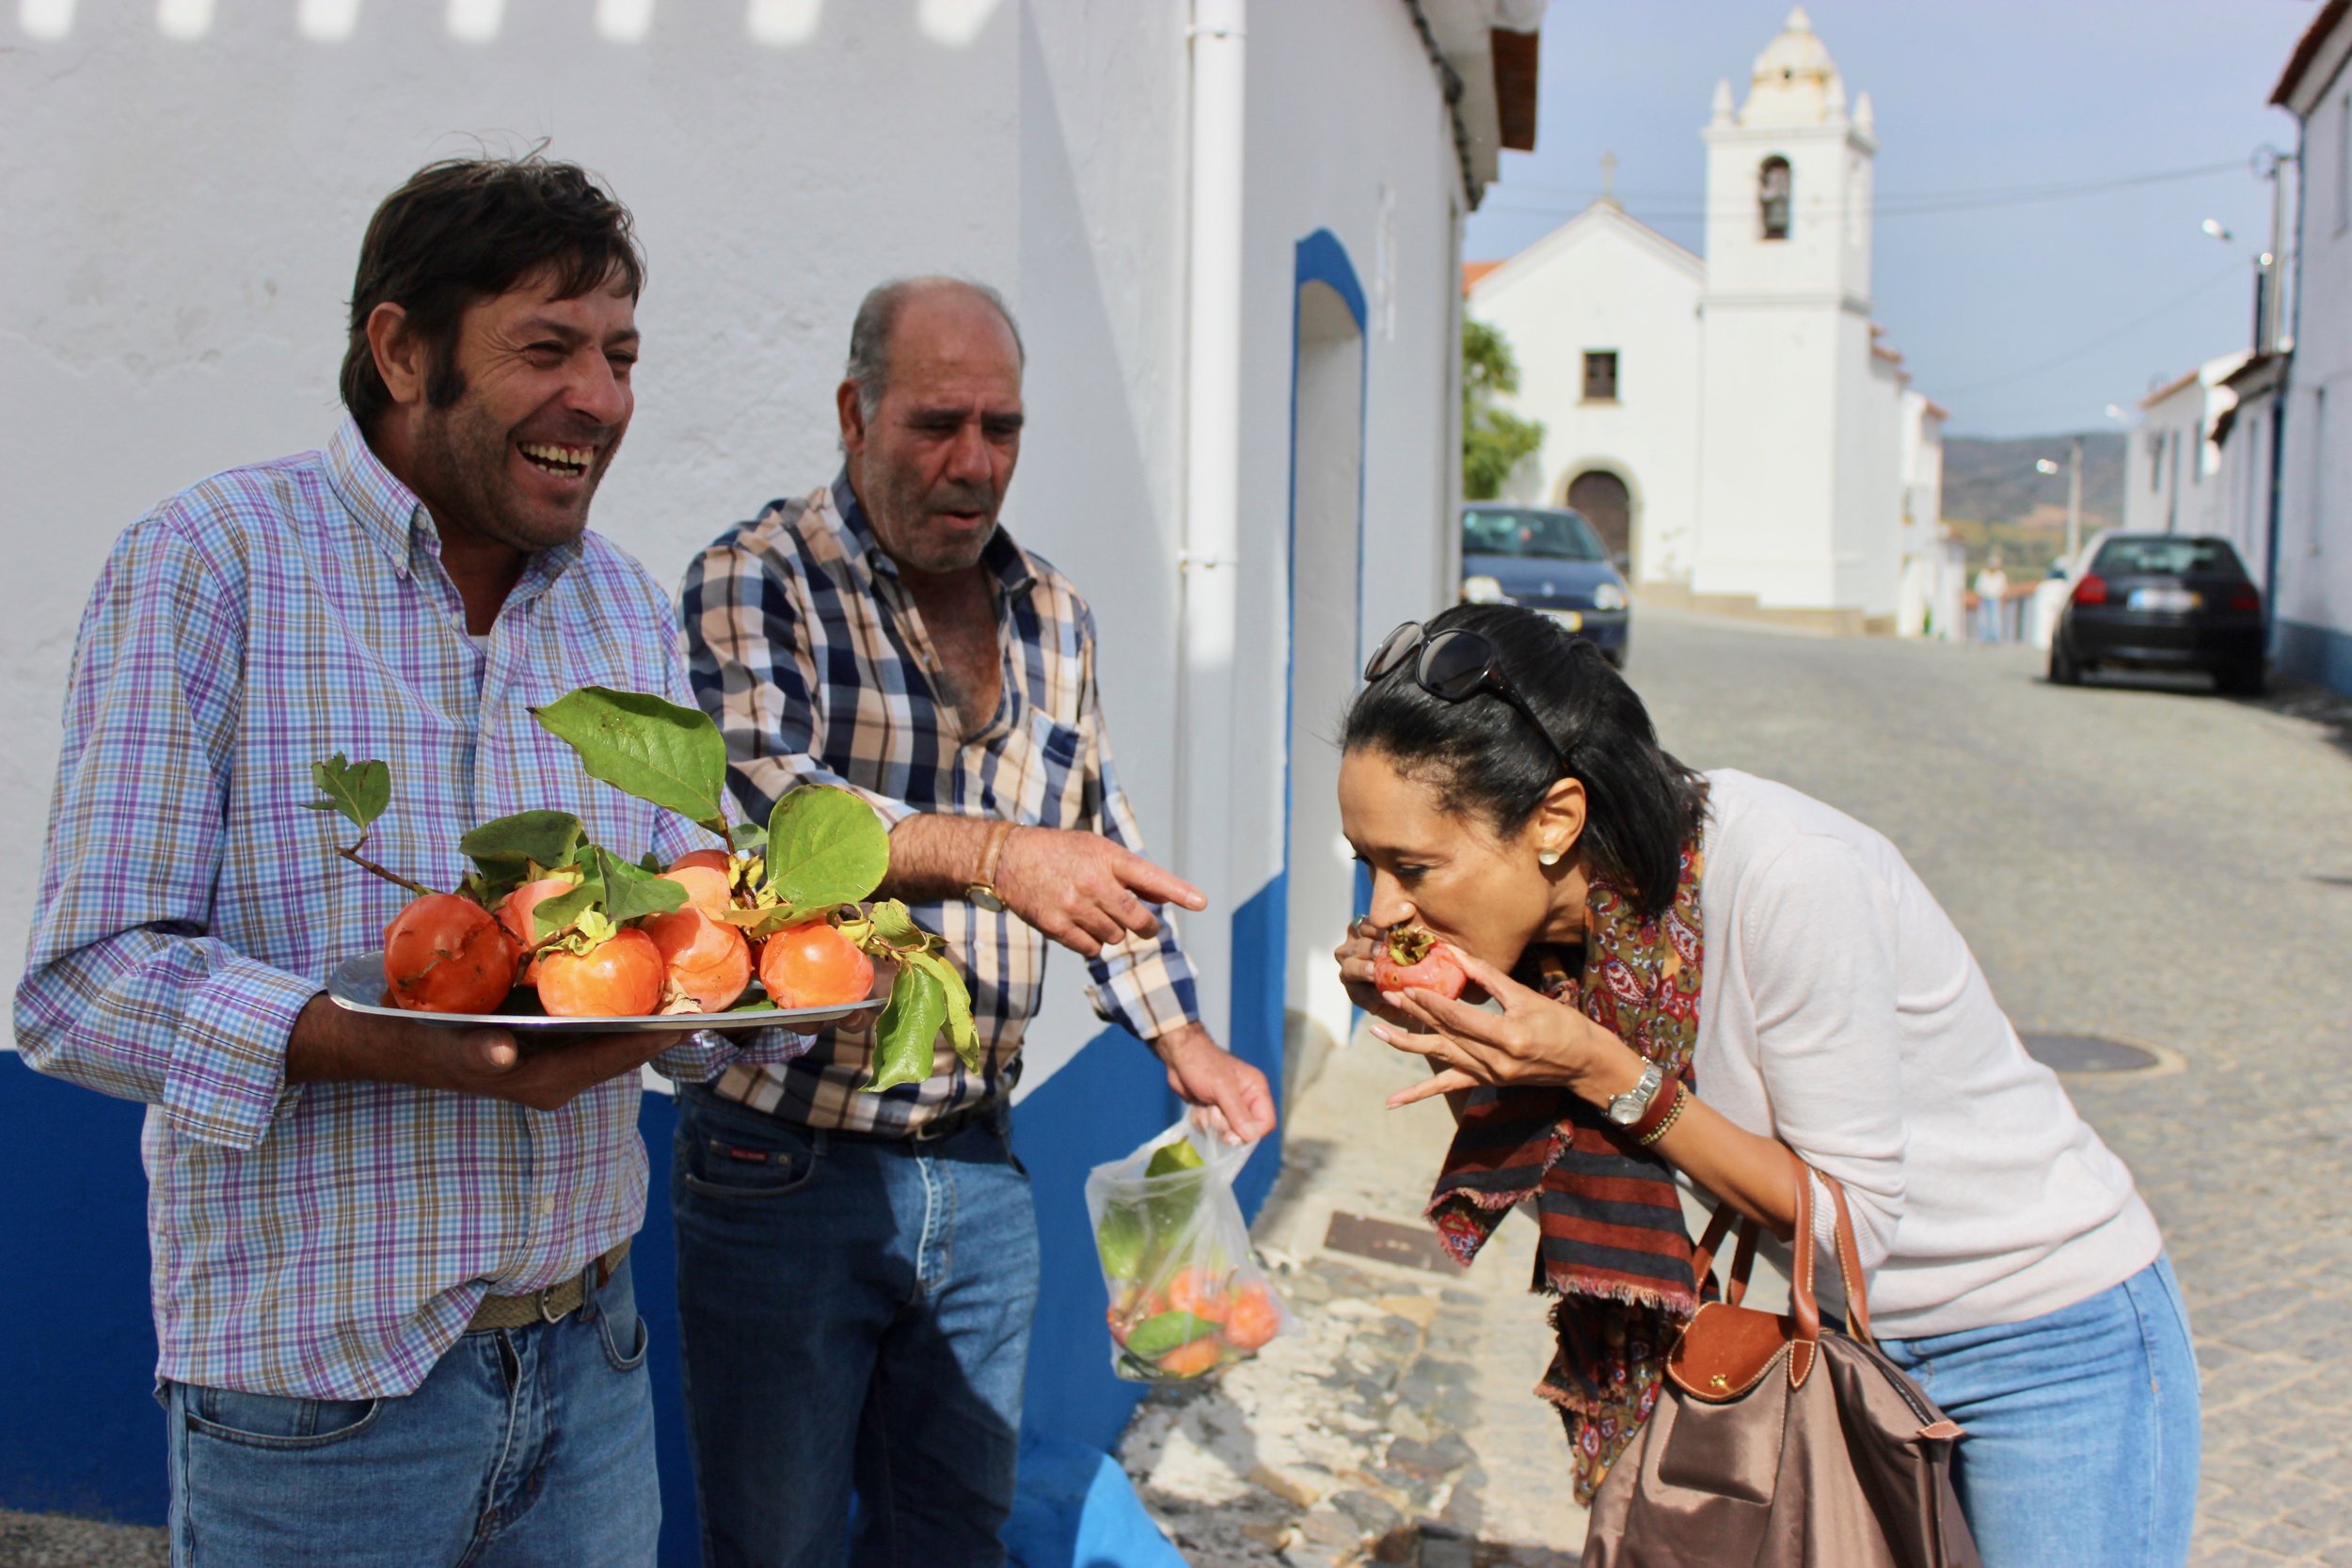 Eating Persimmons in the Alentejo